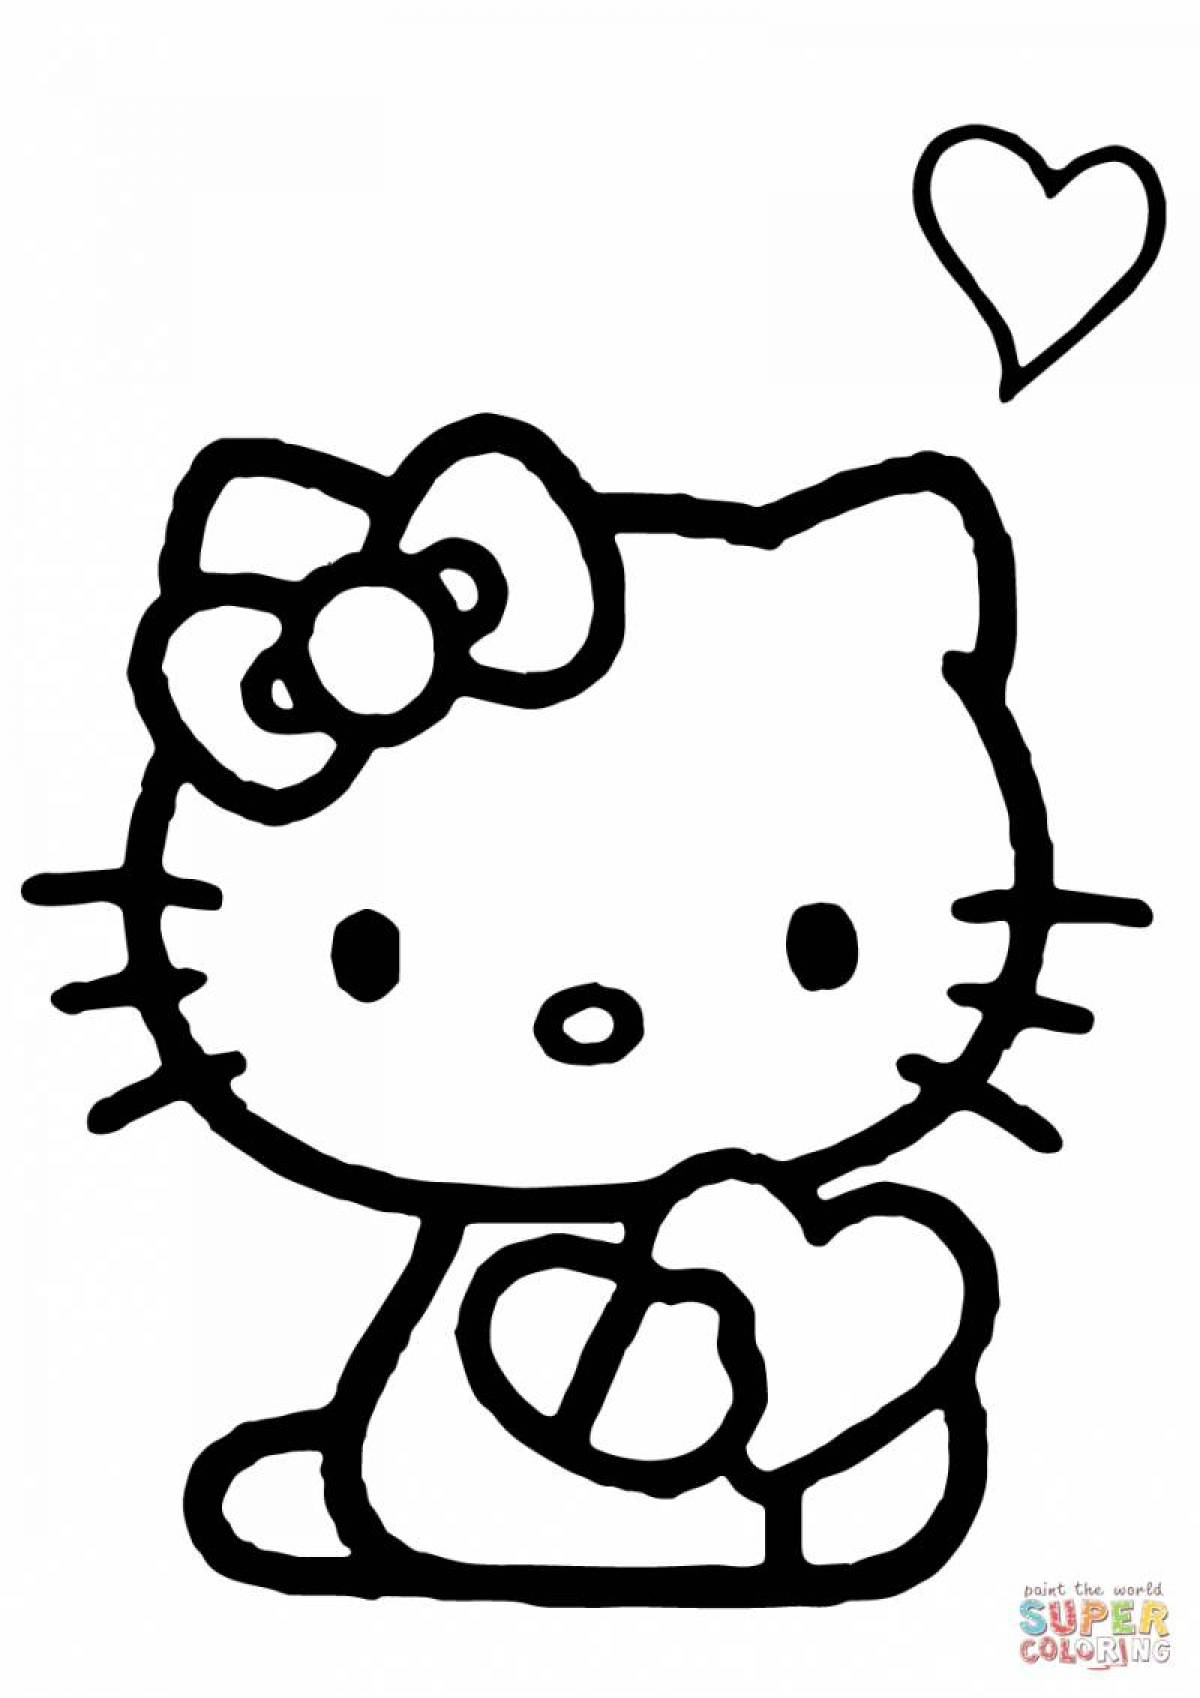 Happy coloring page easy for girls